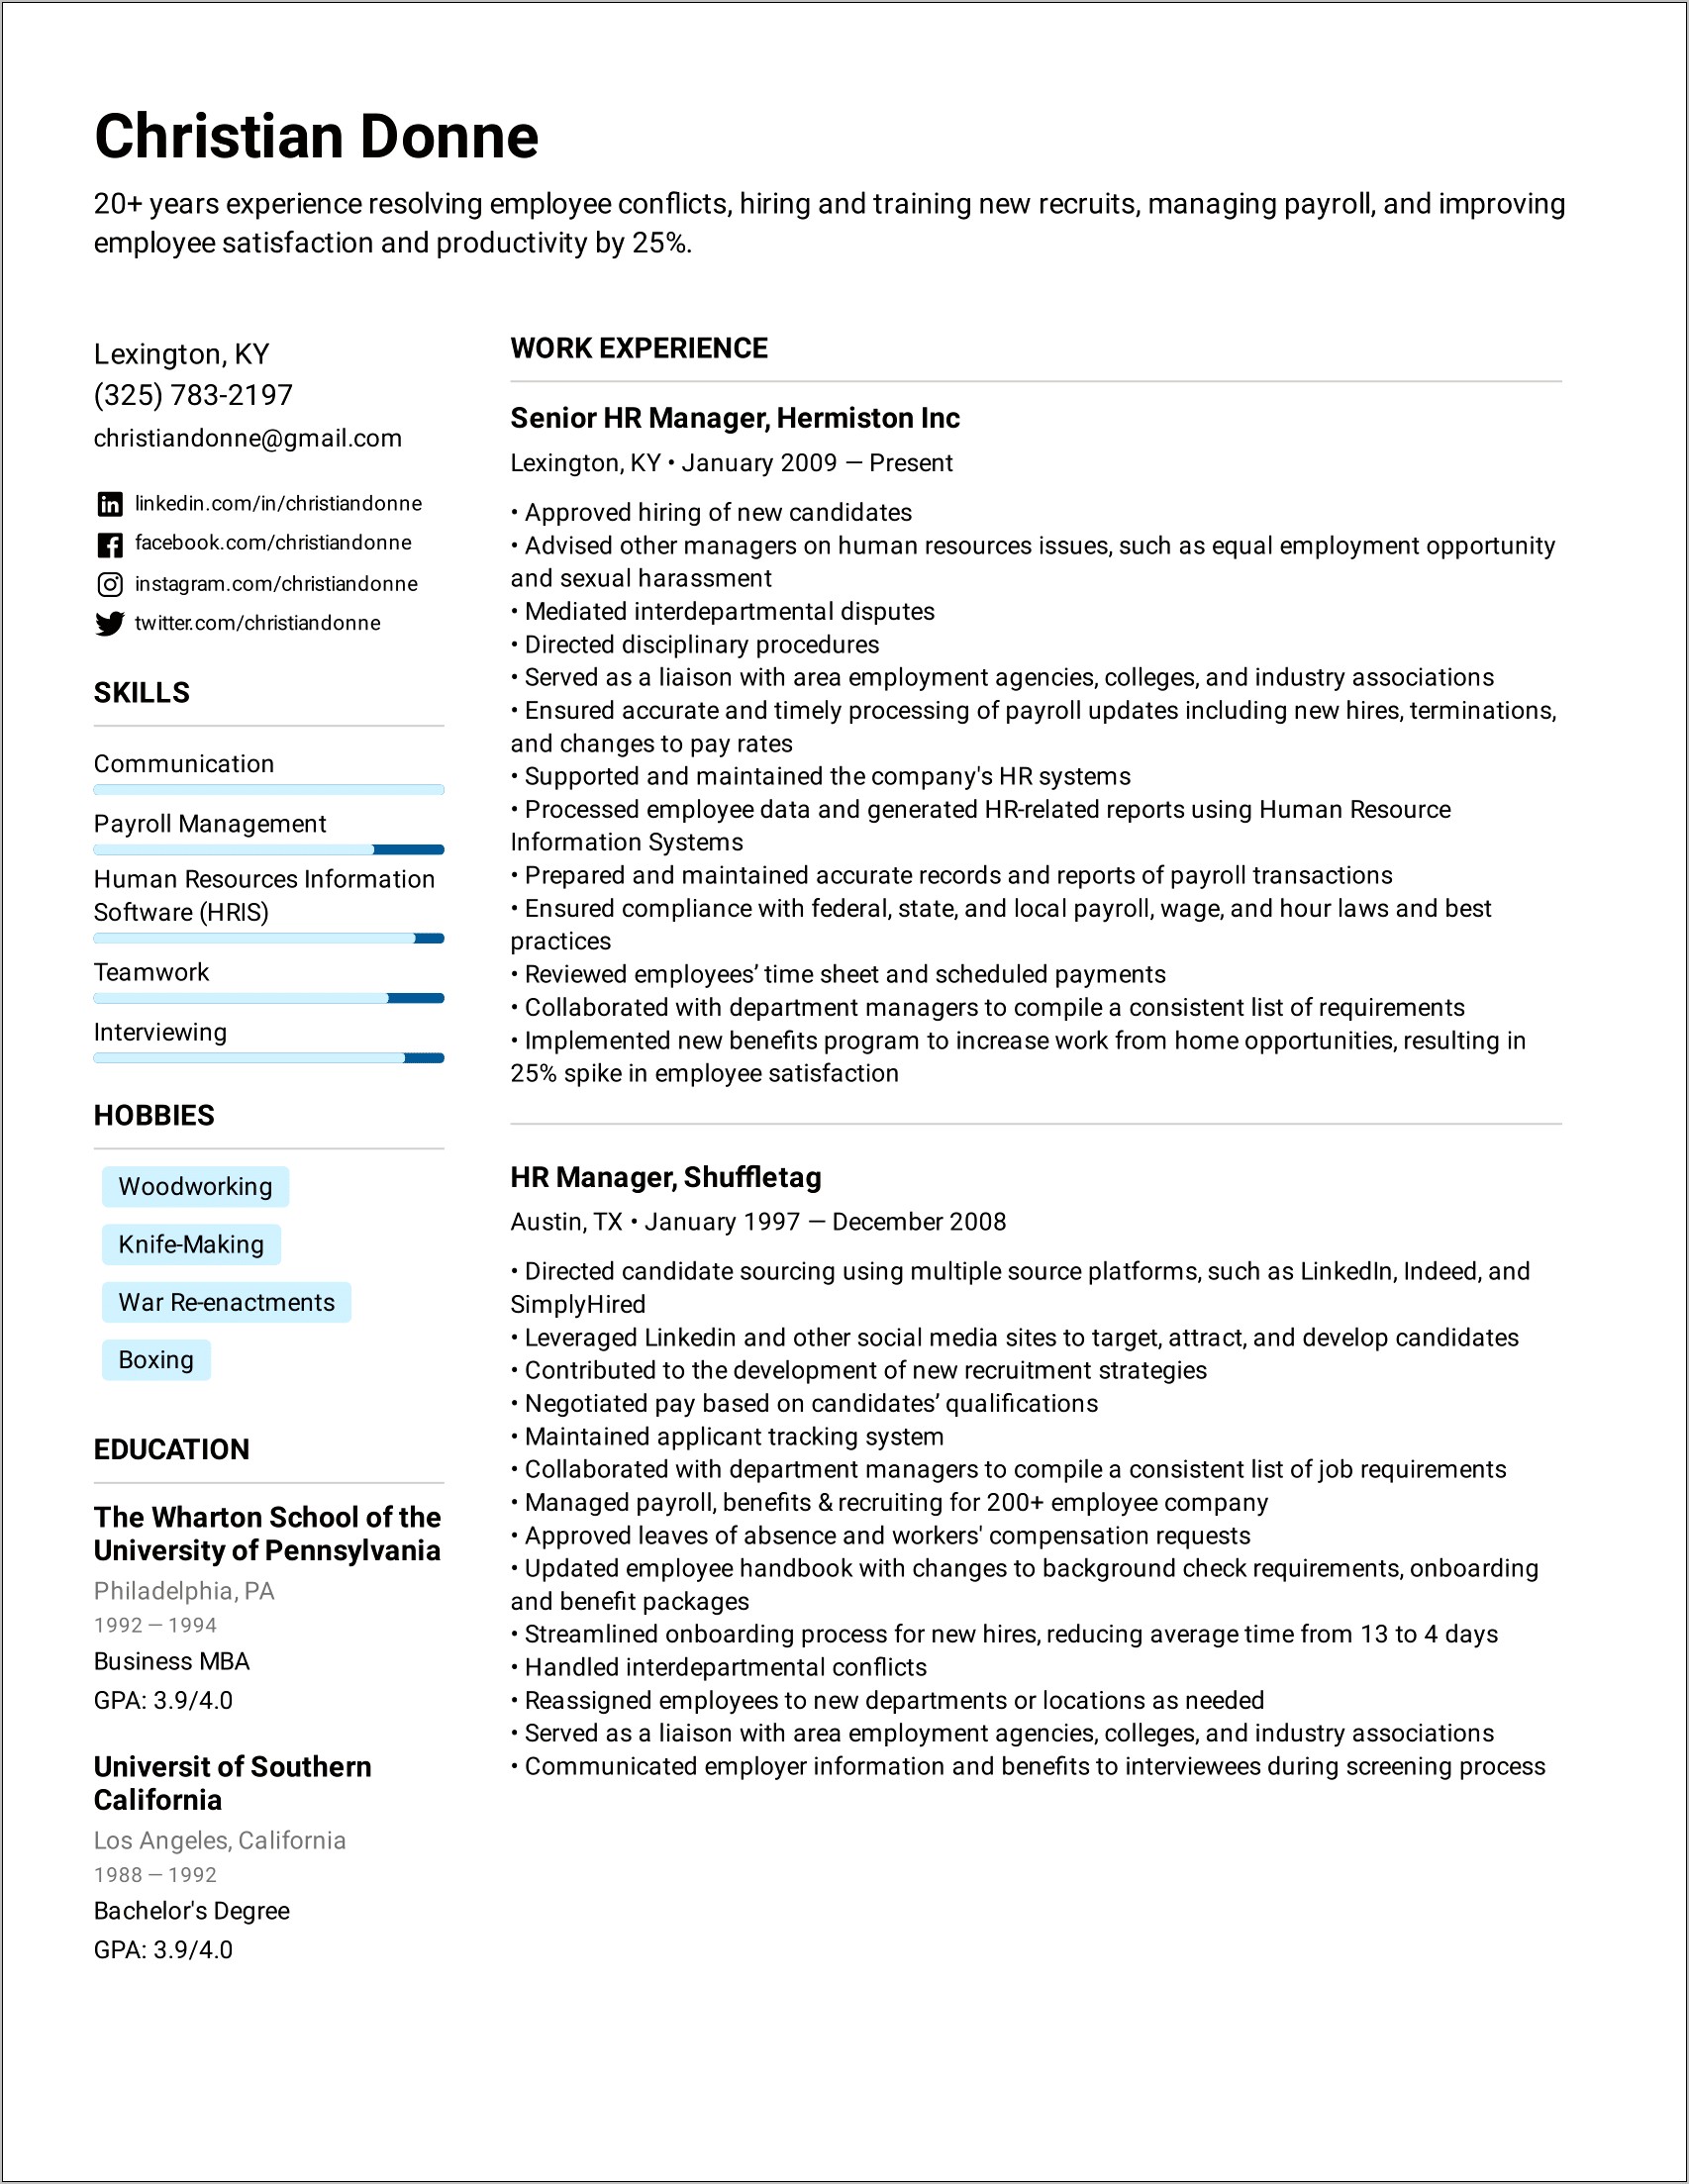 Horw To List Skills With Examples In Resume